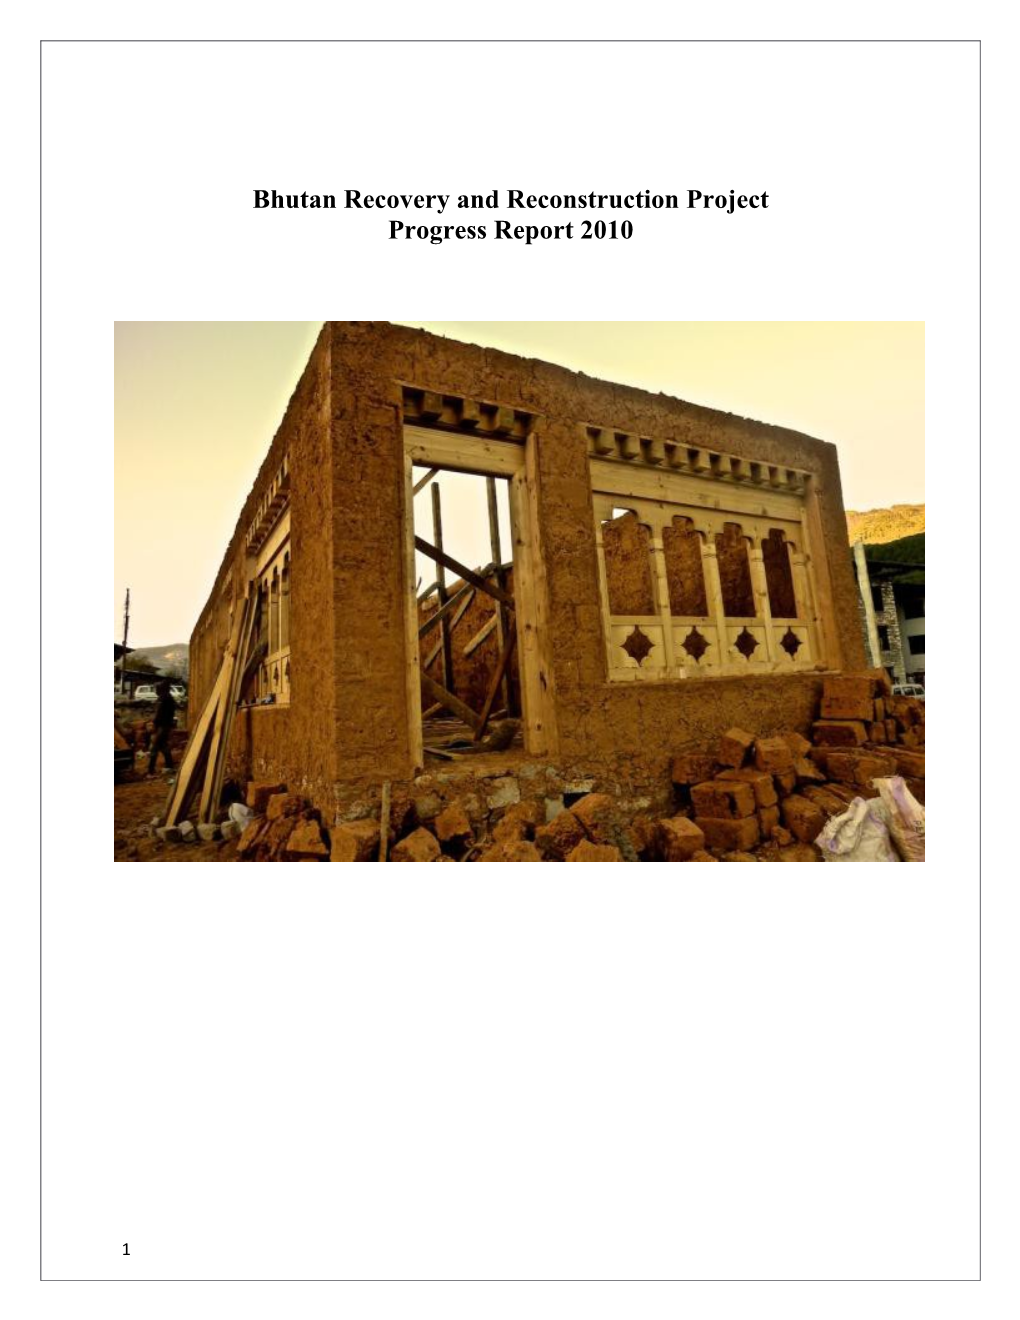 Bhutan Recovery and Reconstruction Project Progress Report